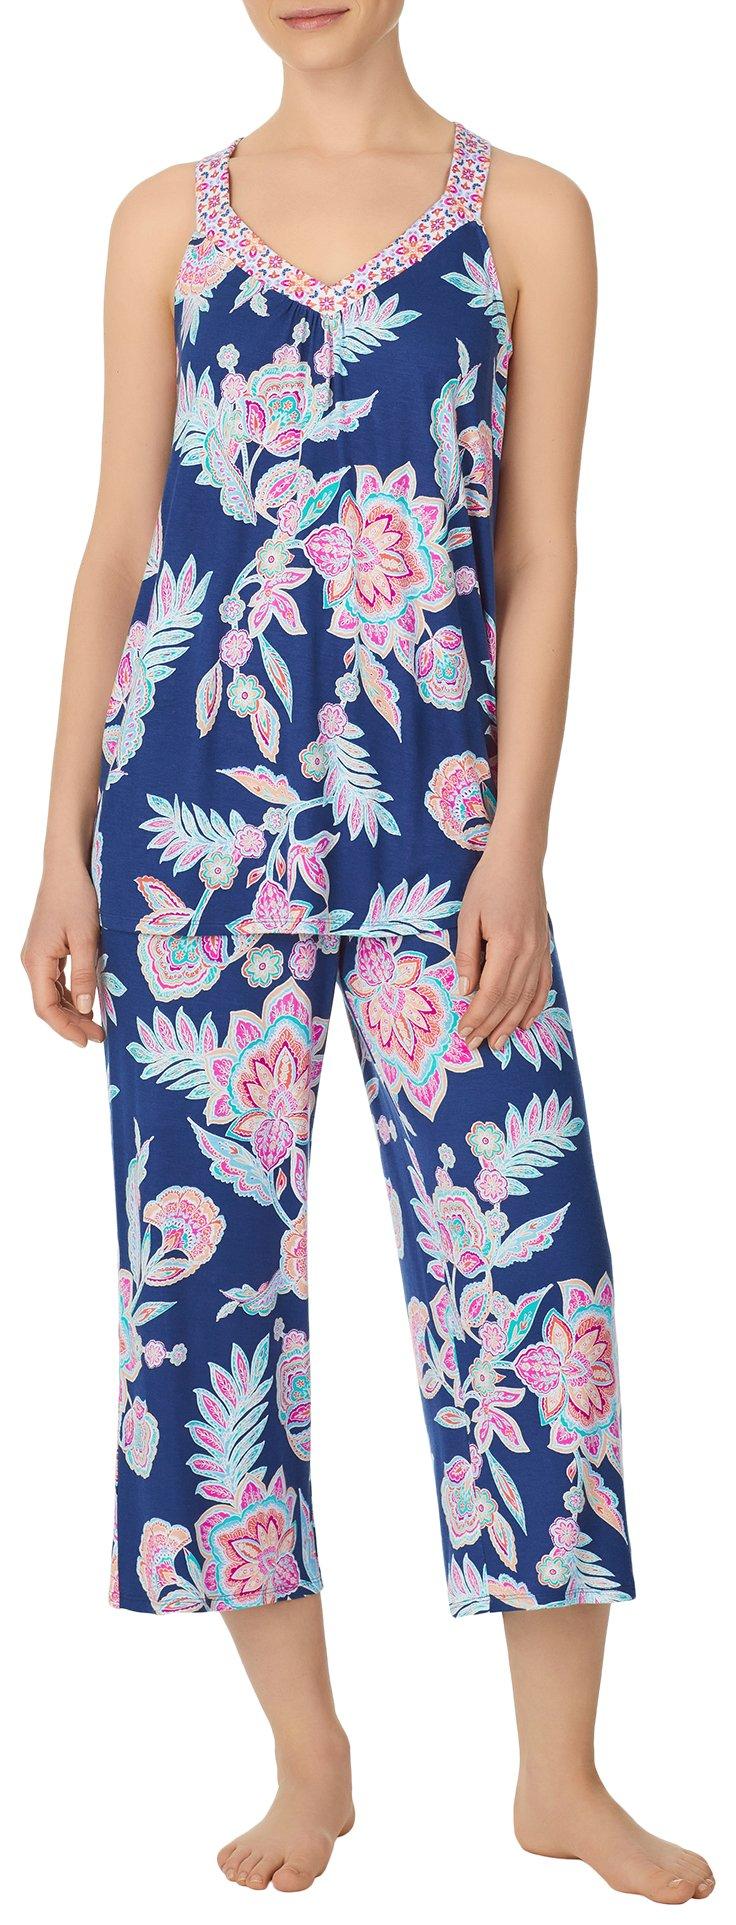 Hue Women's Sipping With Fishes Pj Capri